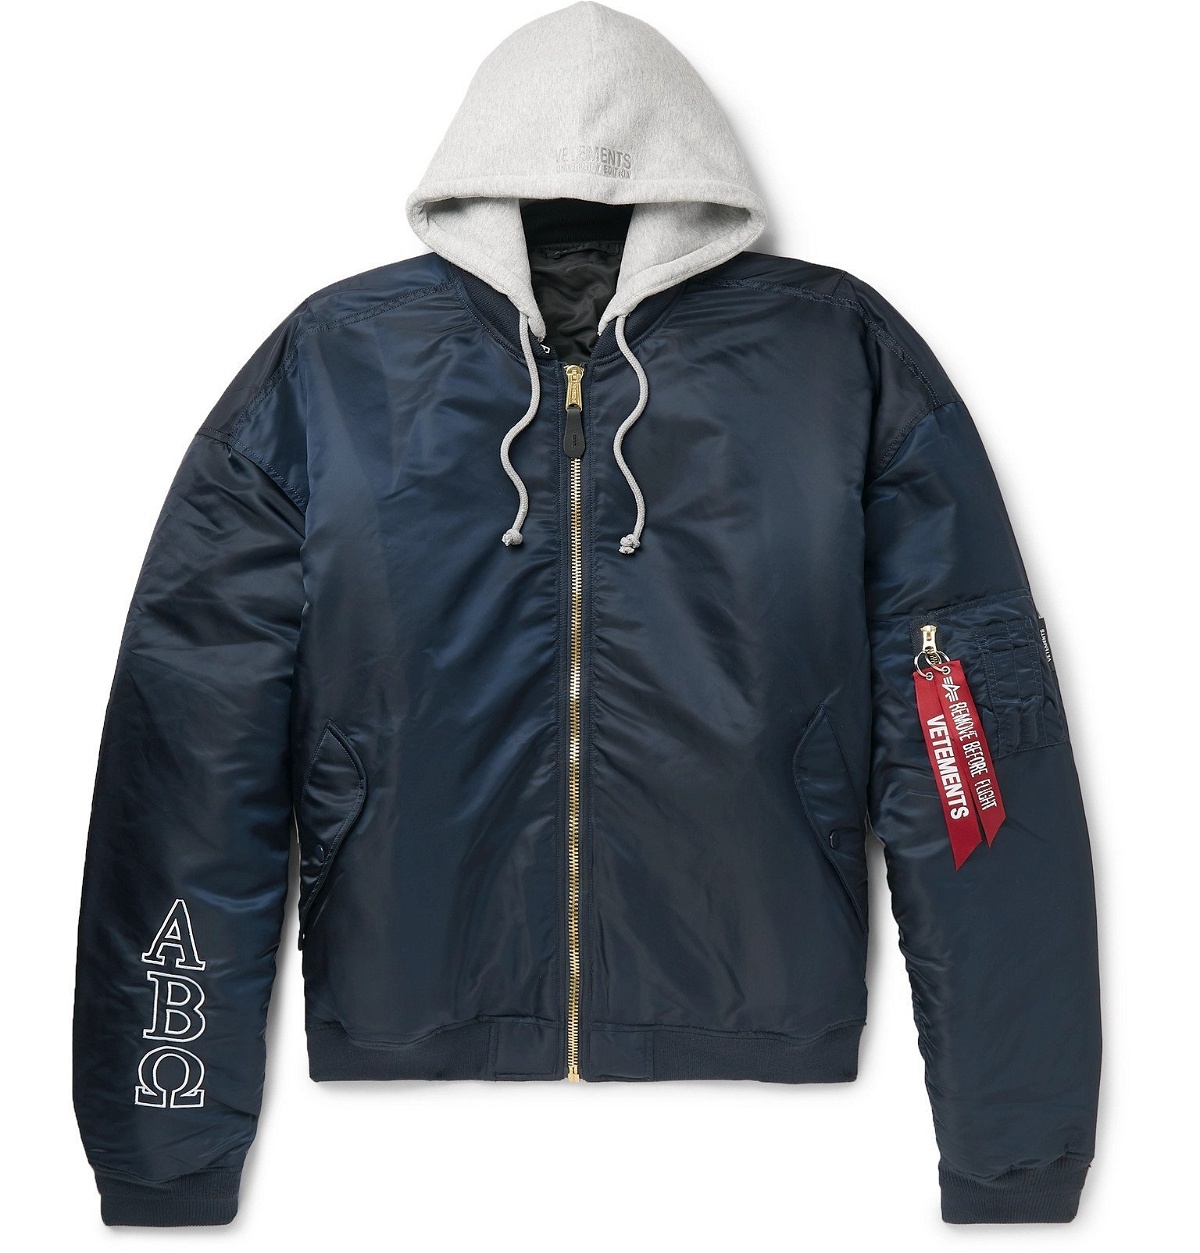 Vetements - Alpha Blue Oversized Embroidered Bomber Vetements Shell Reversible Hooded - Industries Jacket